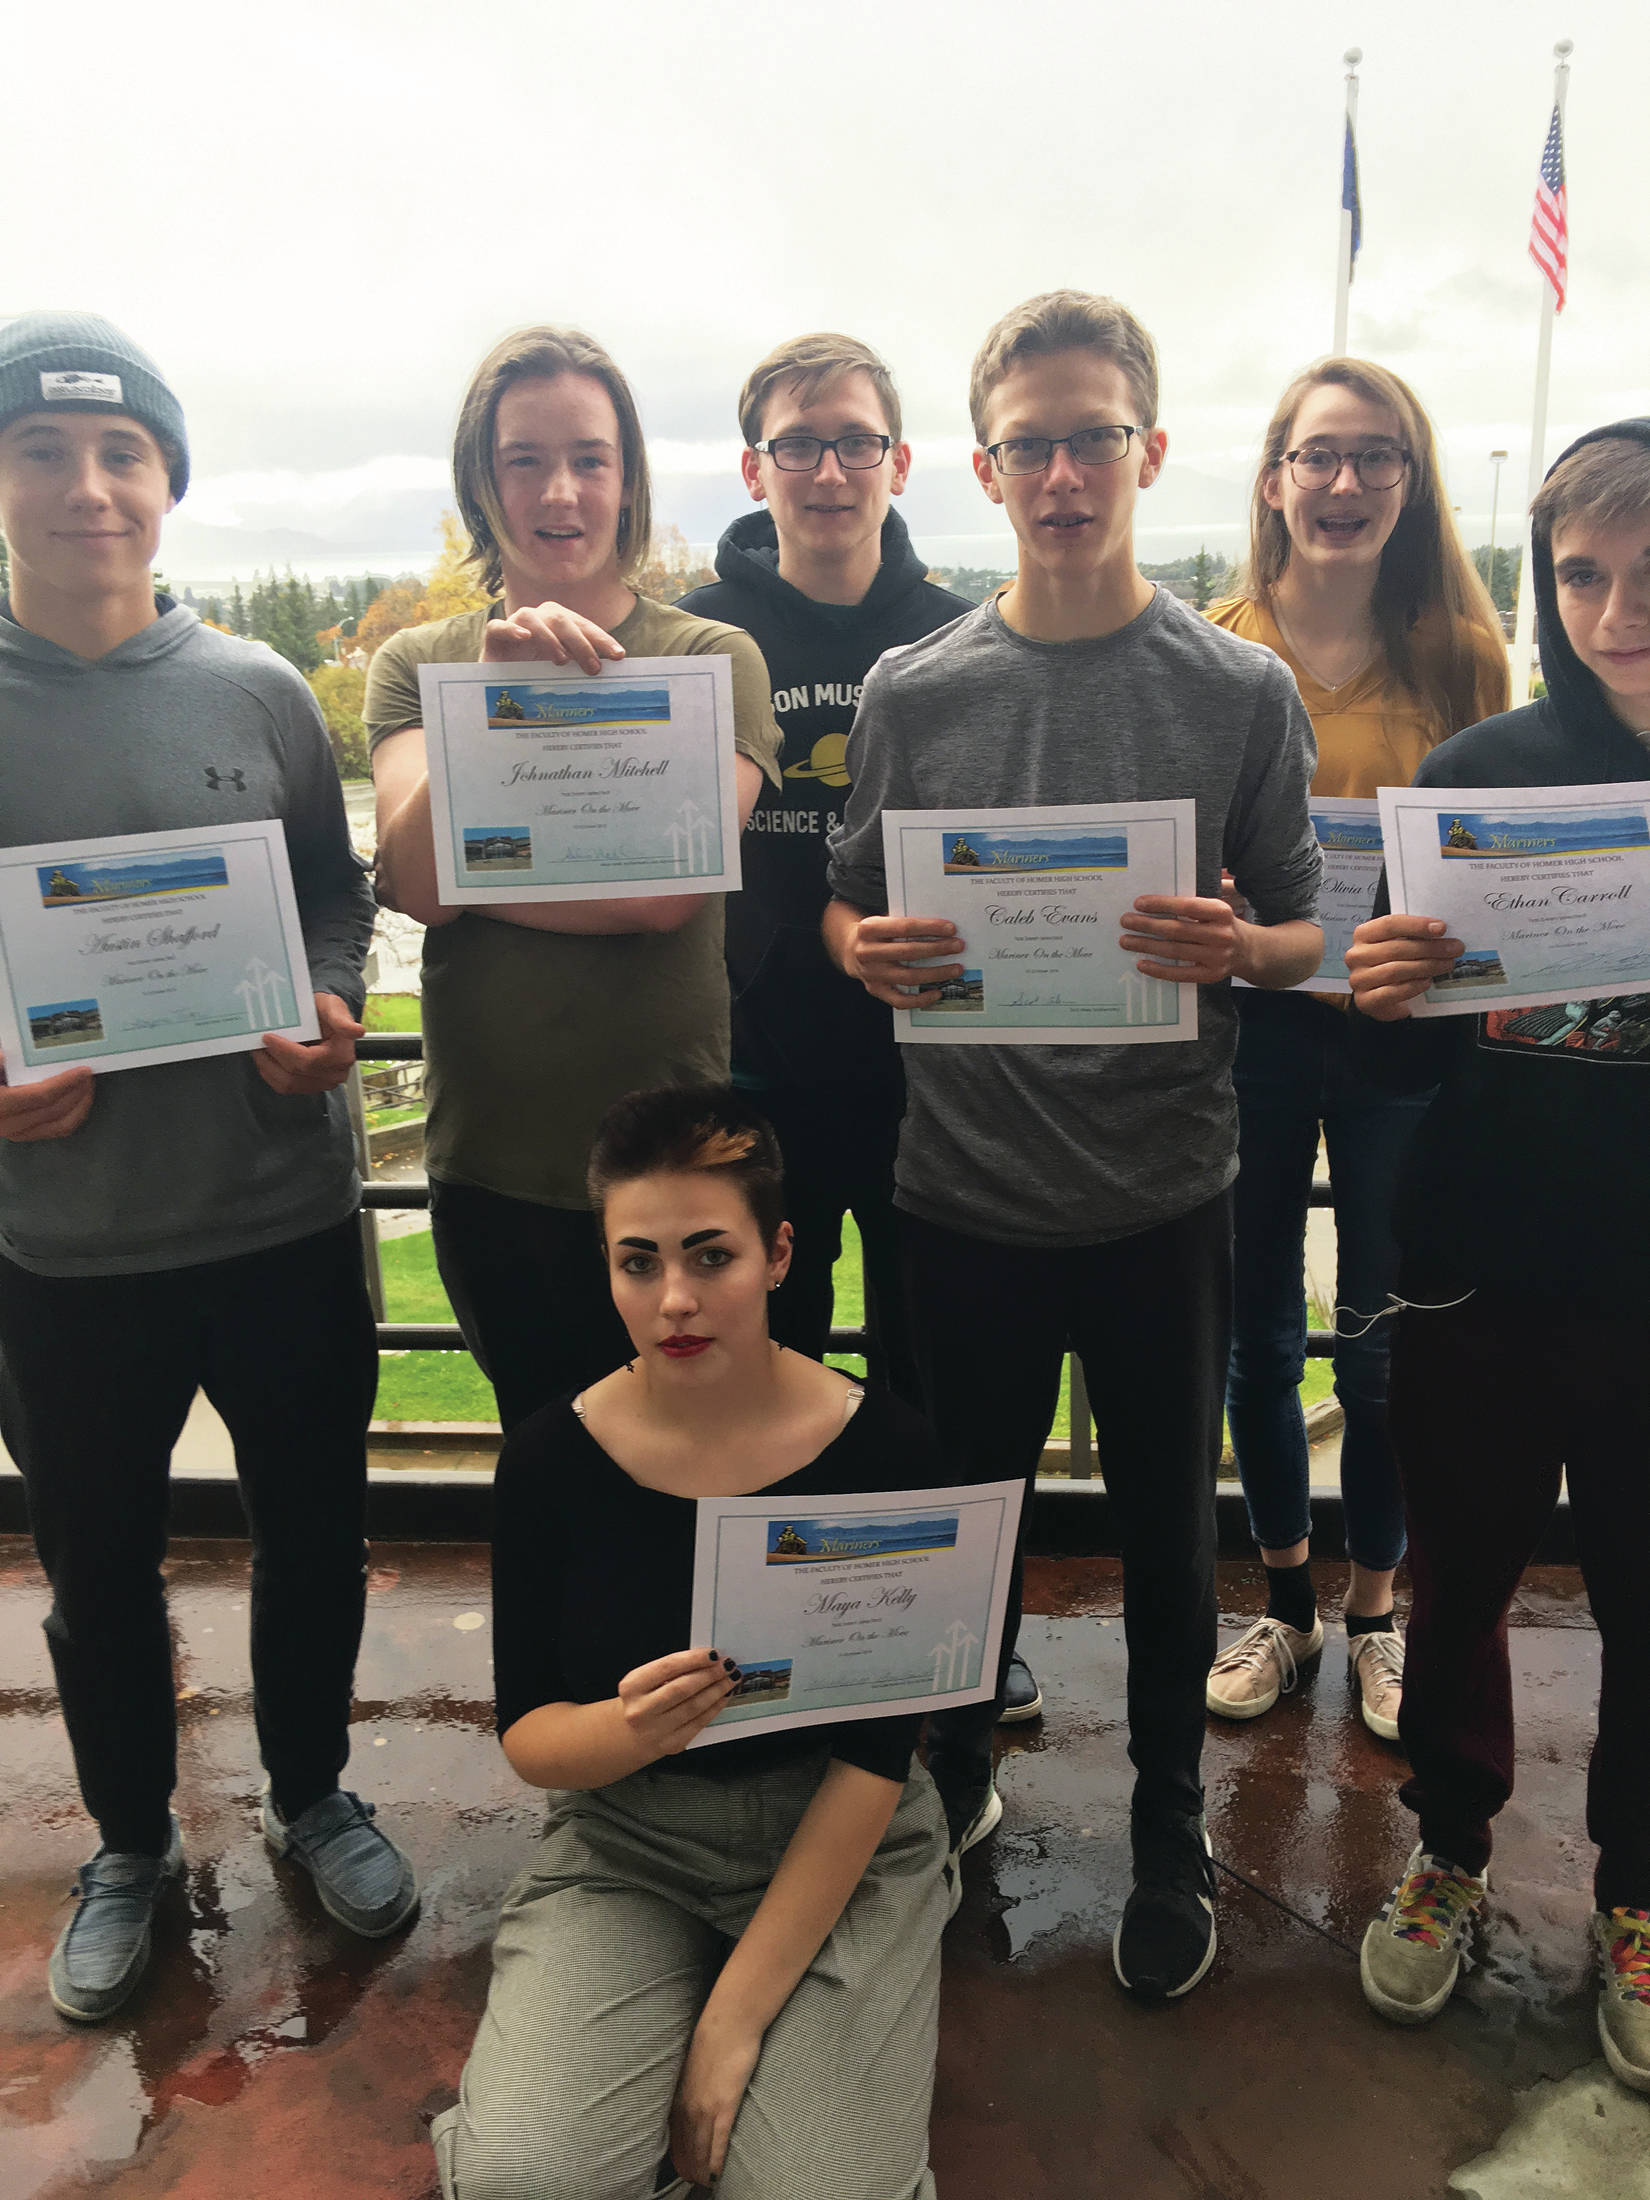 From left to right: Austin Shafford, Johnathan Mitchell, Maya Kelly, Anthony Melkomukov, Caleb Evans, Olivia Smith and Ethan Carroll, shown in this undated photo at Homer High School in Homer, Alaska, are the most recent recipients of the Mariners on the Move award. (Photo courtesy Paul Story)